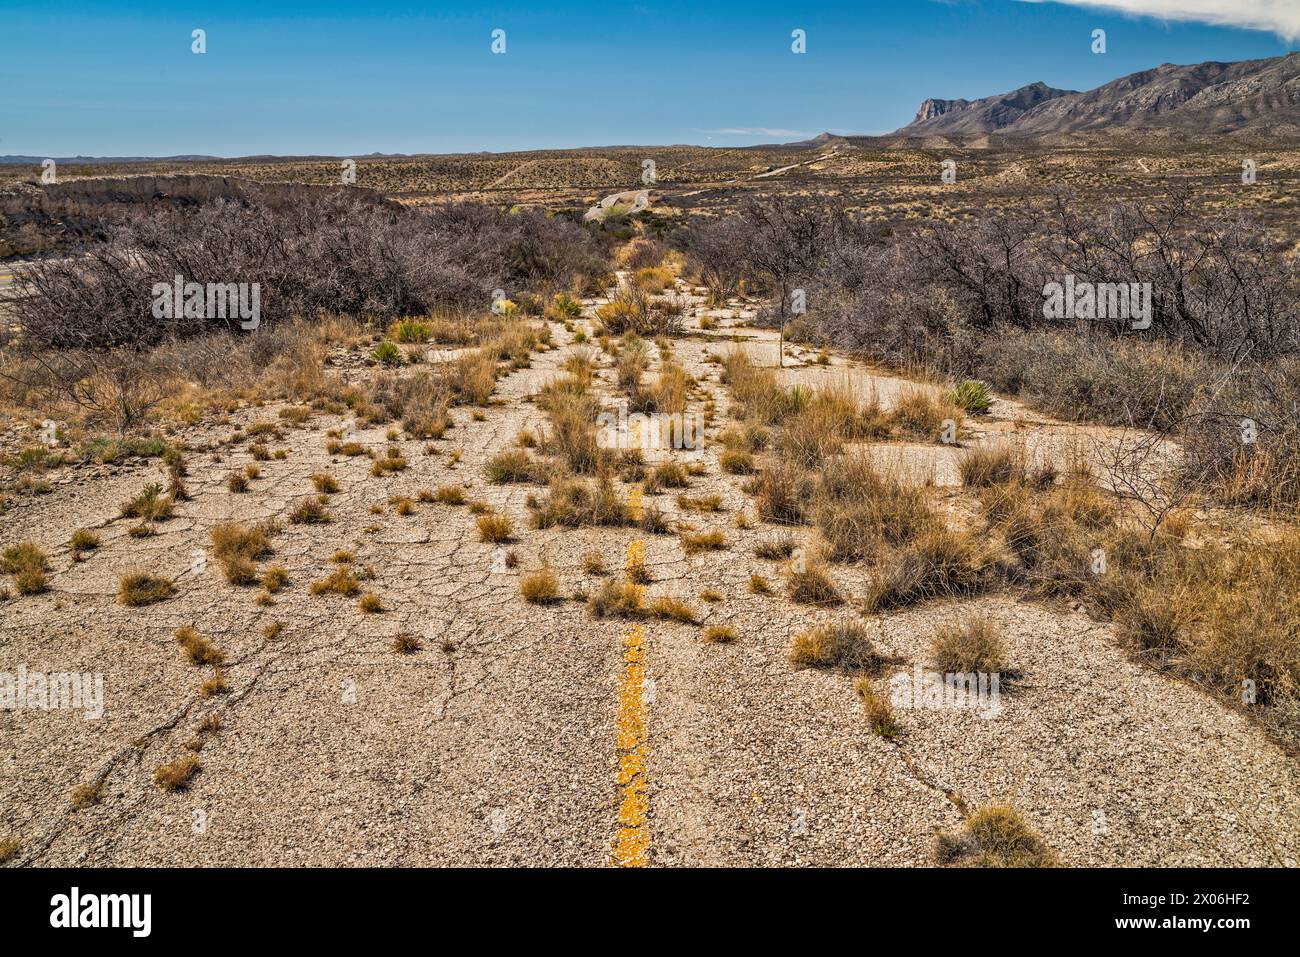 Abandoned section of US-180, US-62 highway with overgrowth, Guadalupe Mountains in distance, Texas, USA Stock Photo